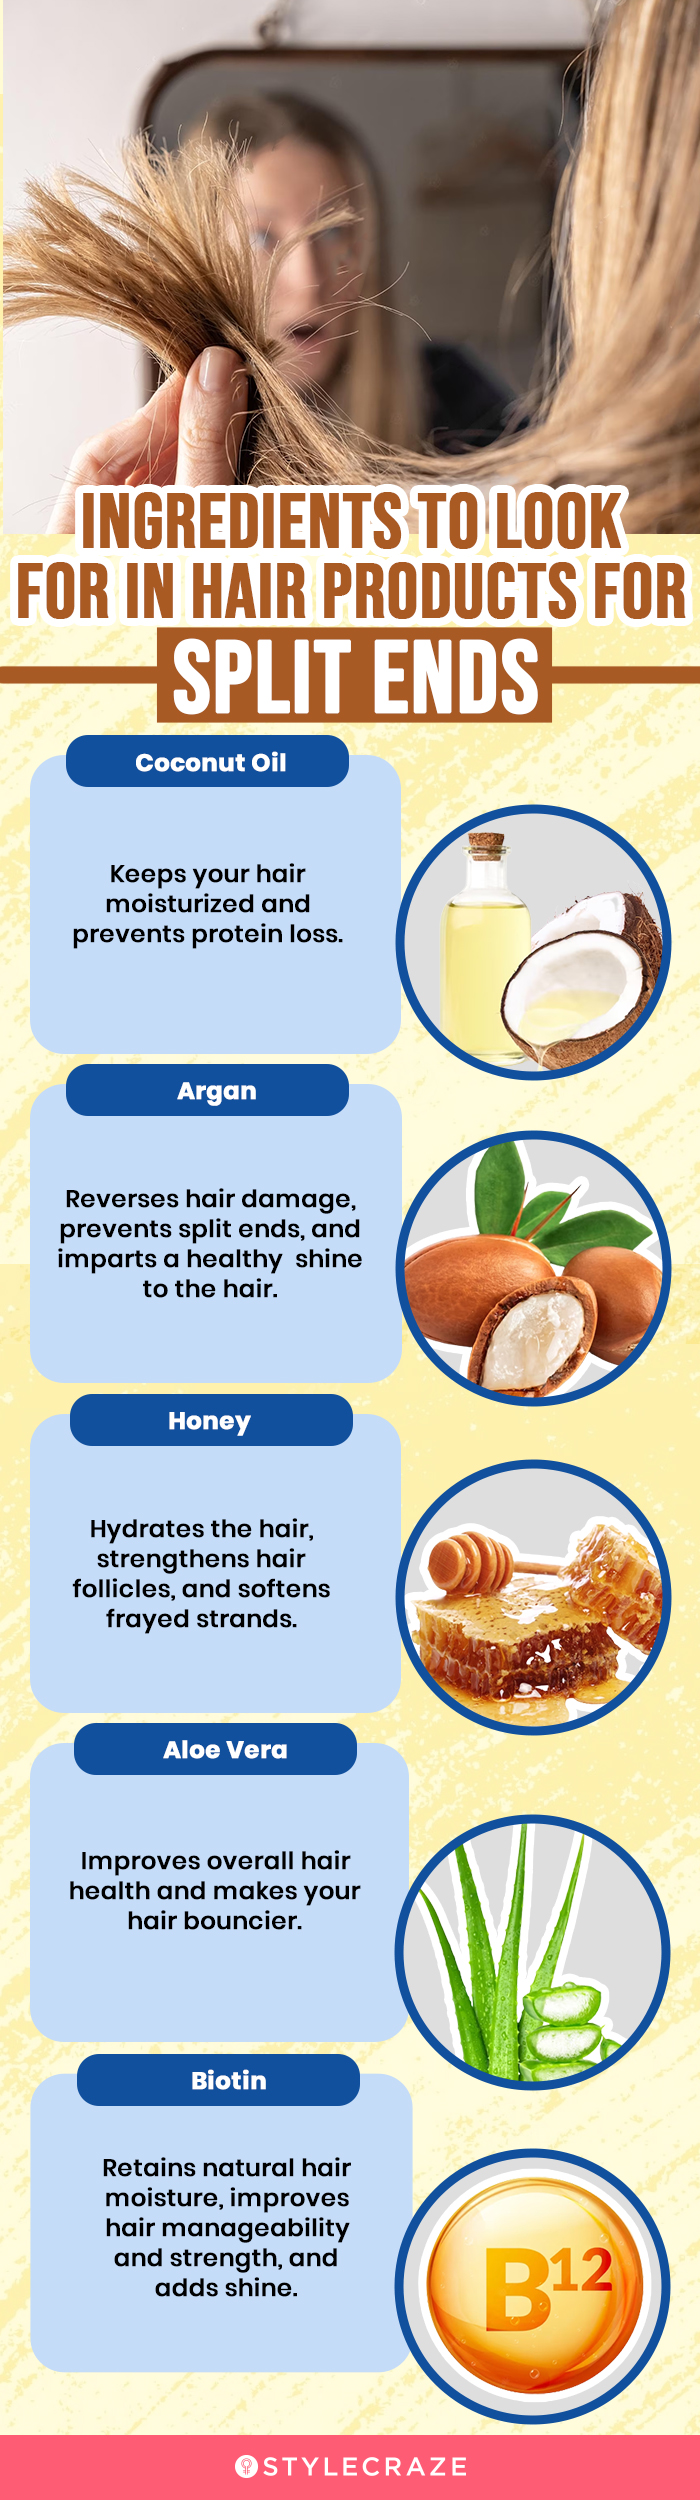 Ingredients To Look For To Repair Split Ends (infographic)